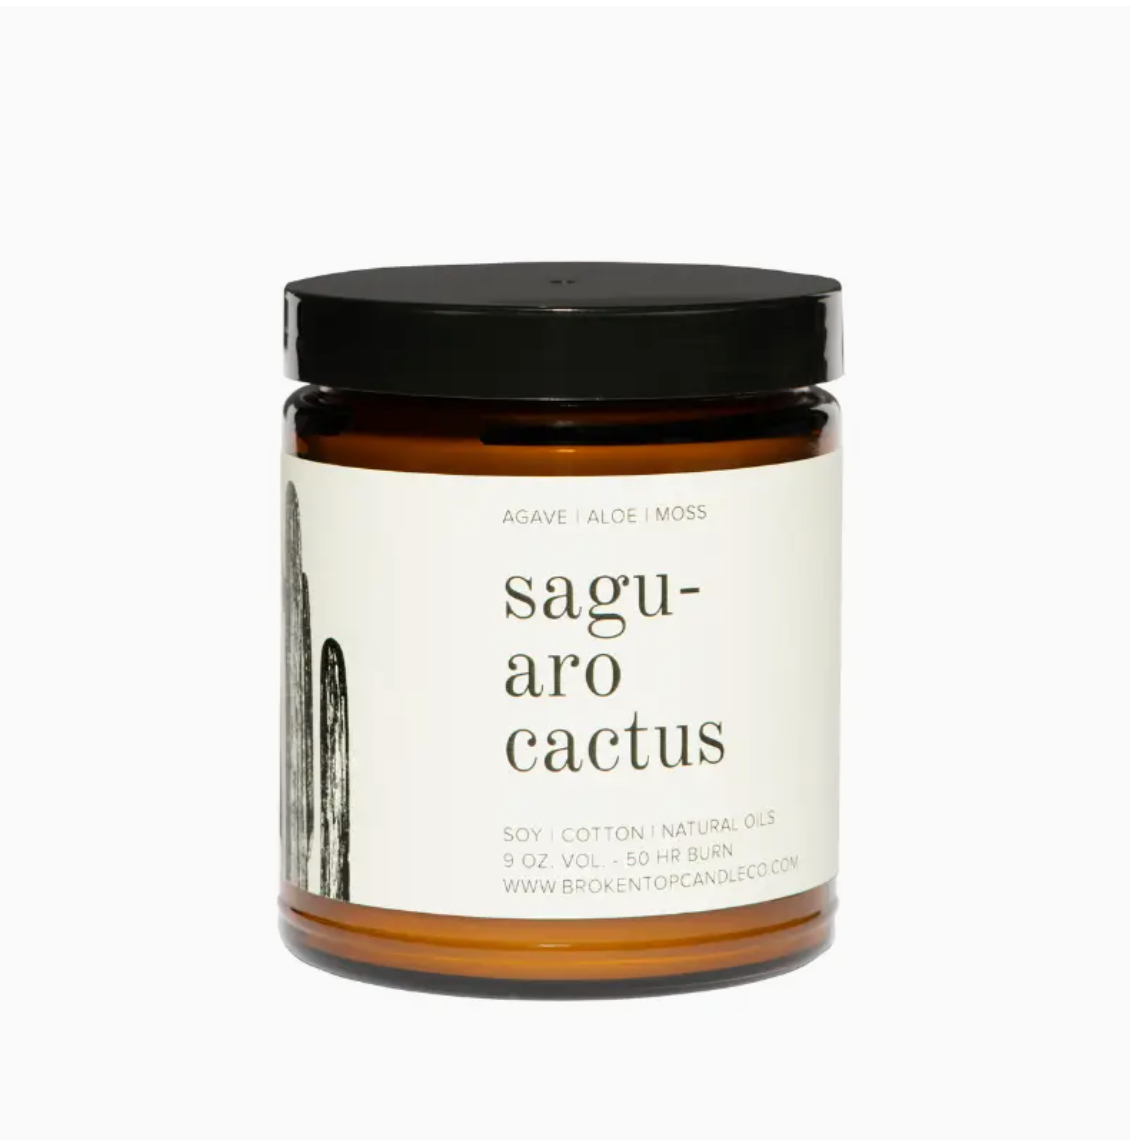 A Faire soy candle in a glass jar labeled "saguaro cactus" with "agave, aloe, moss" written beneath. The jar is brown with a black lid and the label includes an illustration of a cactus.